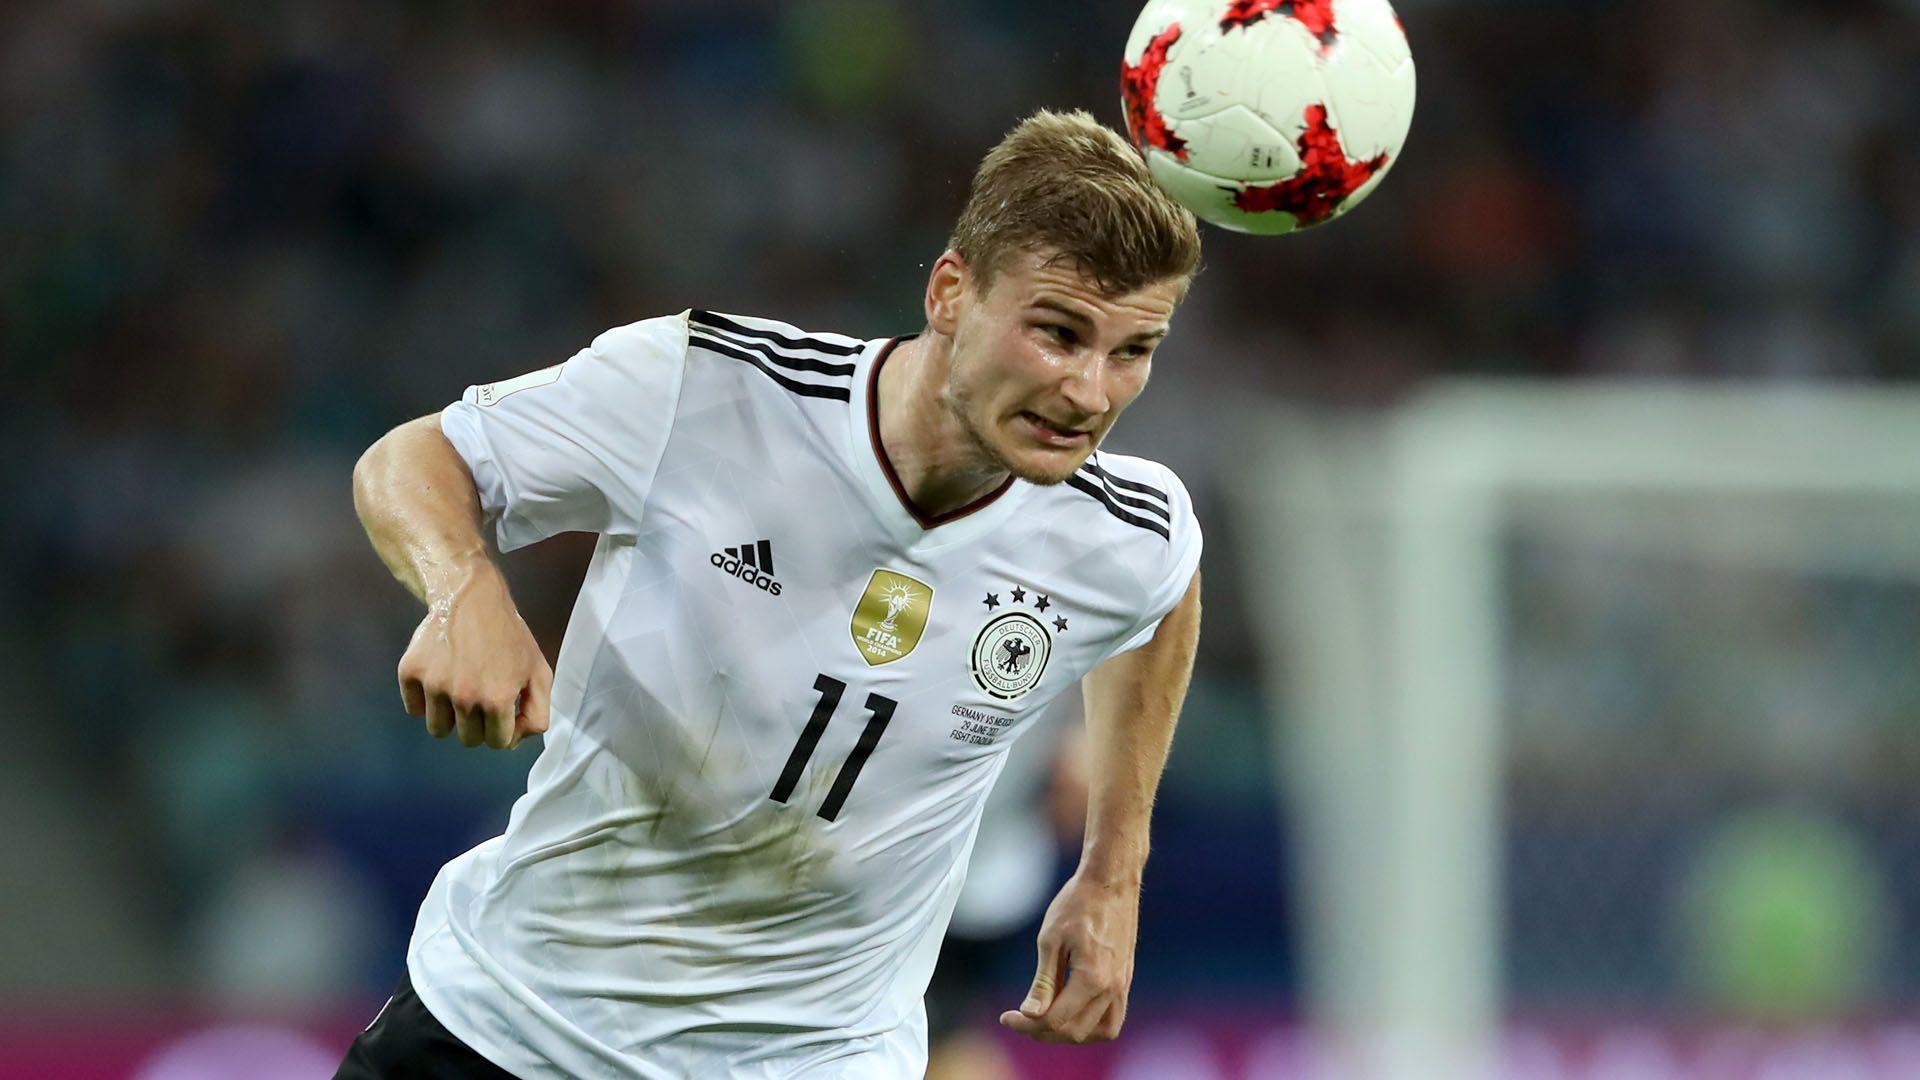 Timo Werner Germany Confederations Cup 2017. #Futebolll